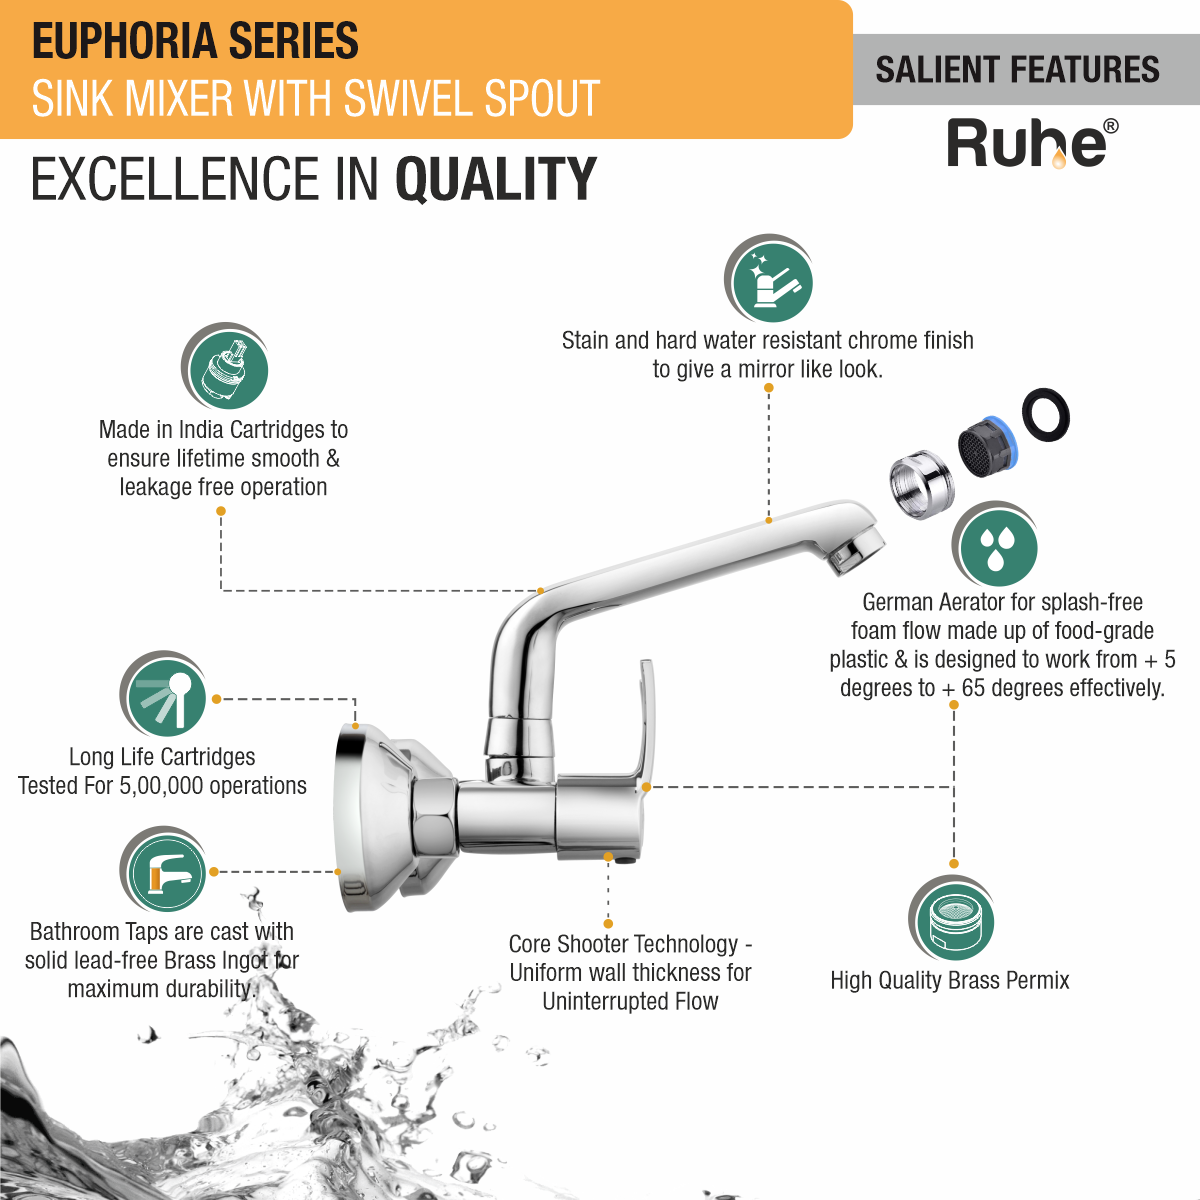 Euphoria Sink Mixer with Small (7 inches) Swivel Spout Faucet features